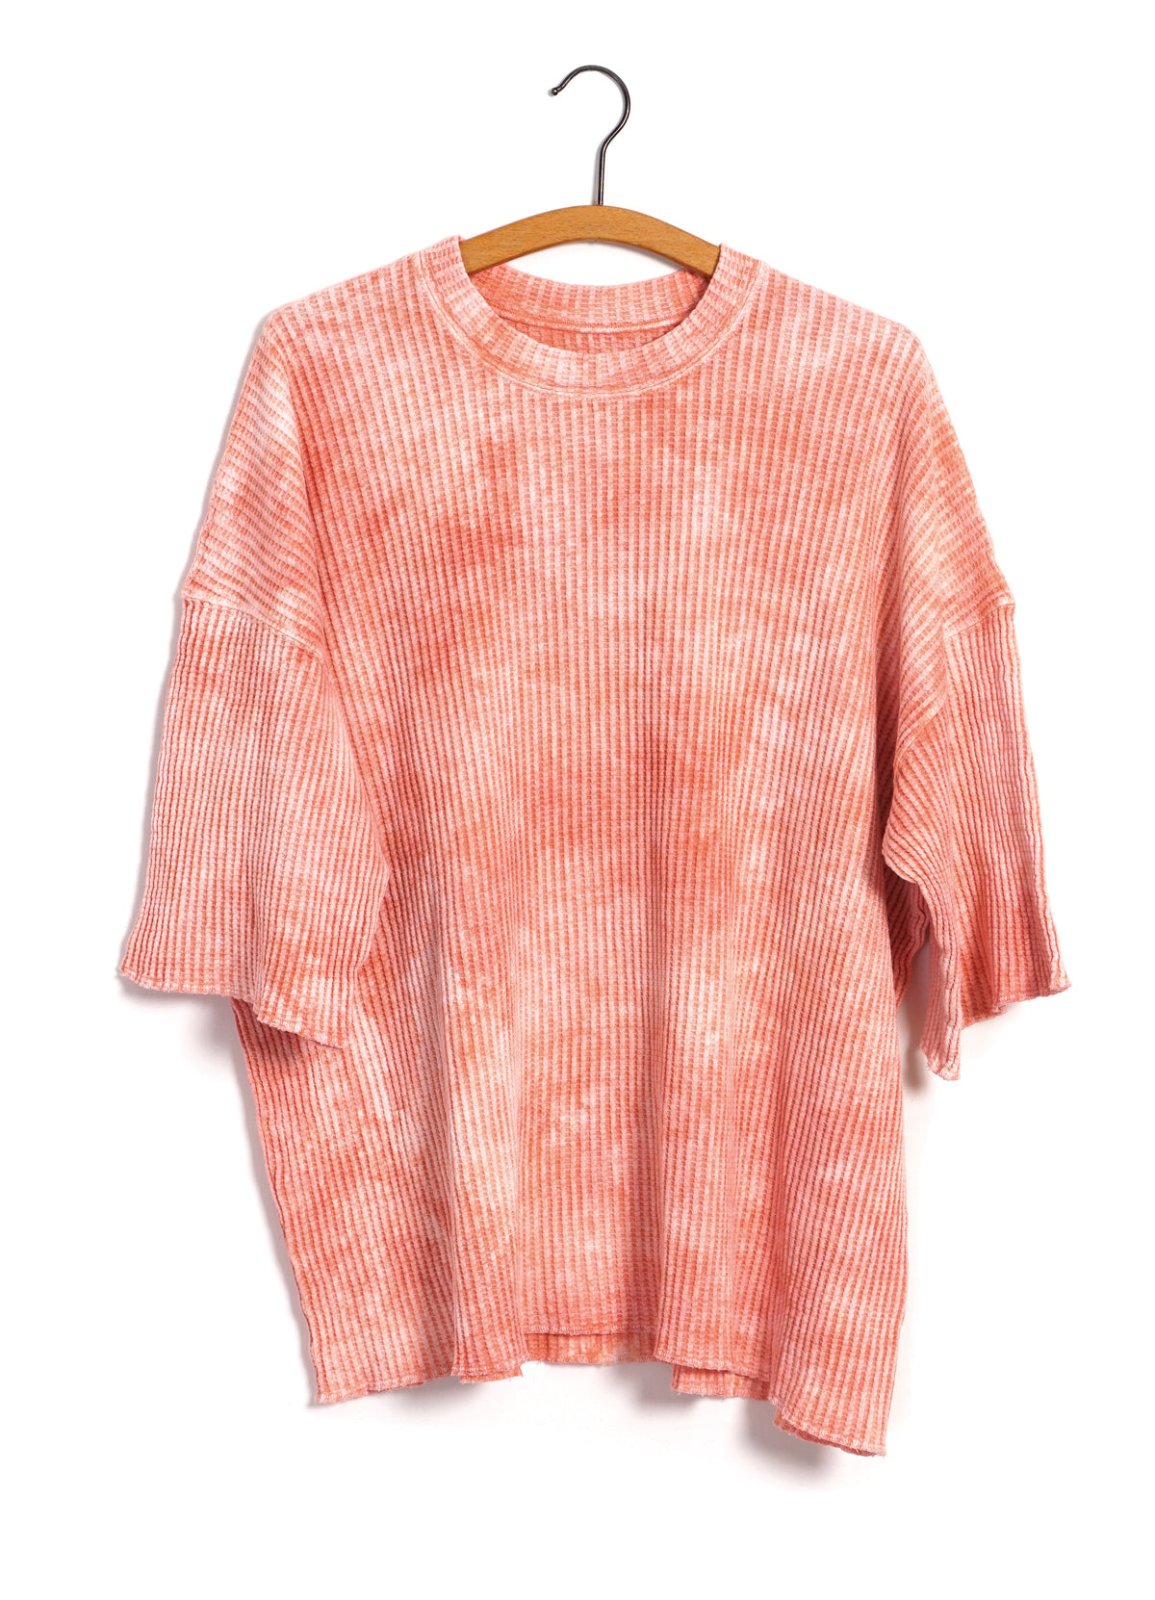 MONITALY - TIE DYE T-SHIRT | Enzyme & Silicon Washed Thermal Crewneck | Pink - HANSEN Garments